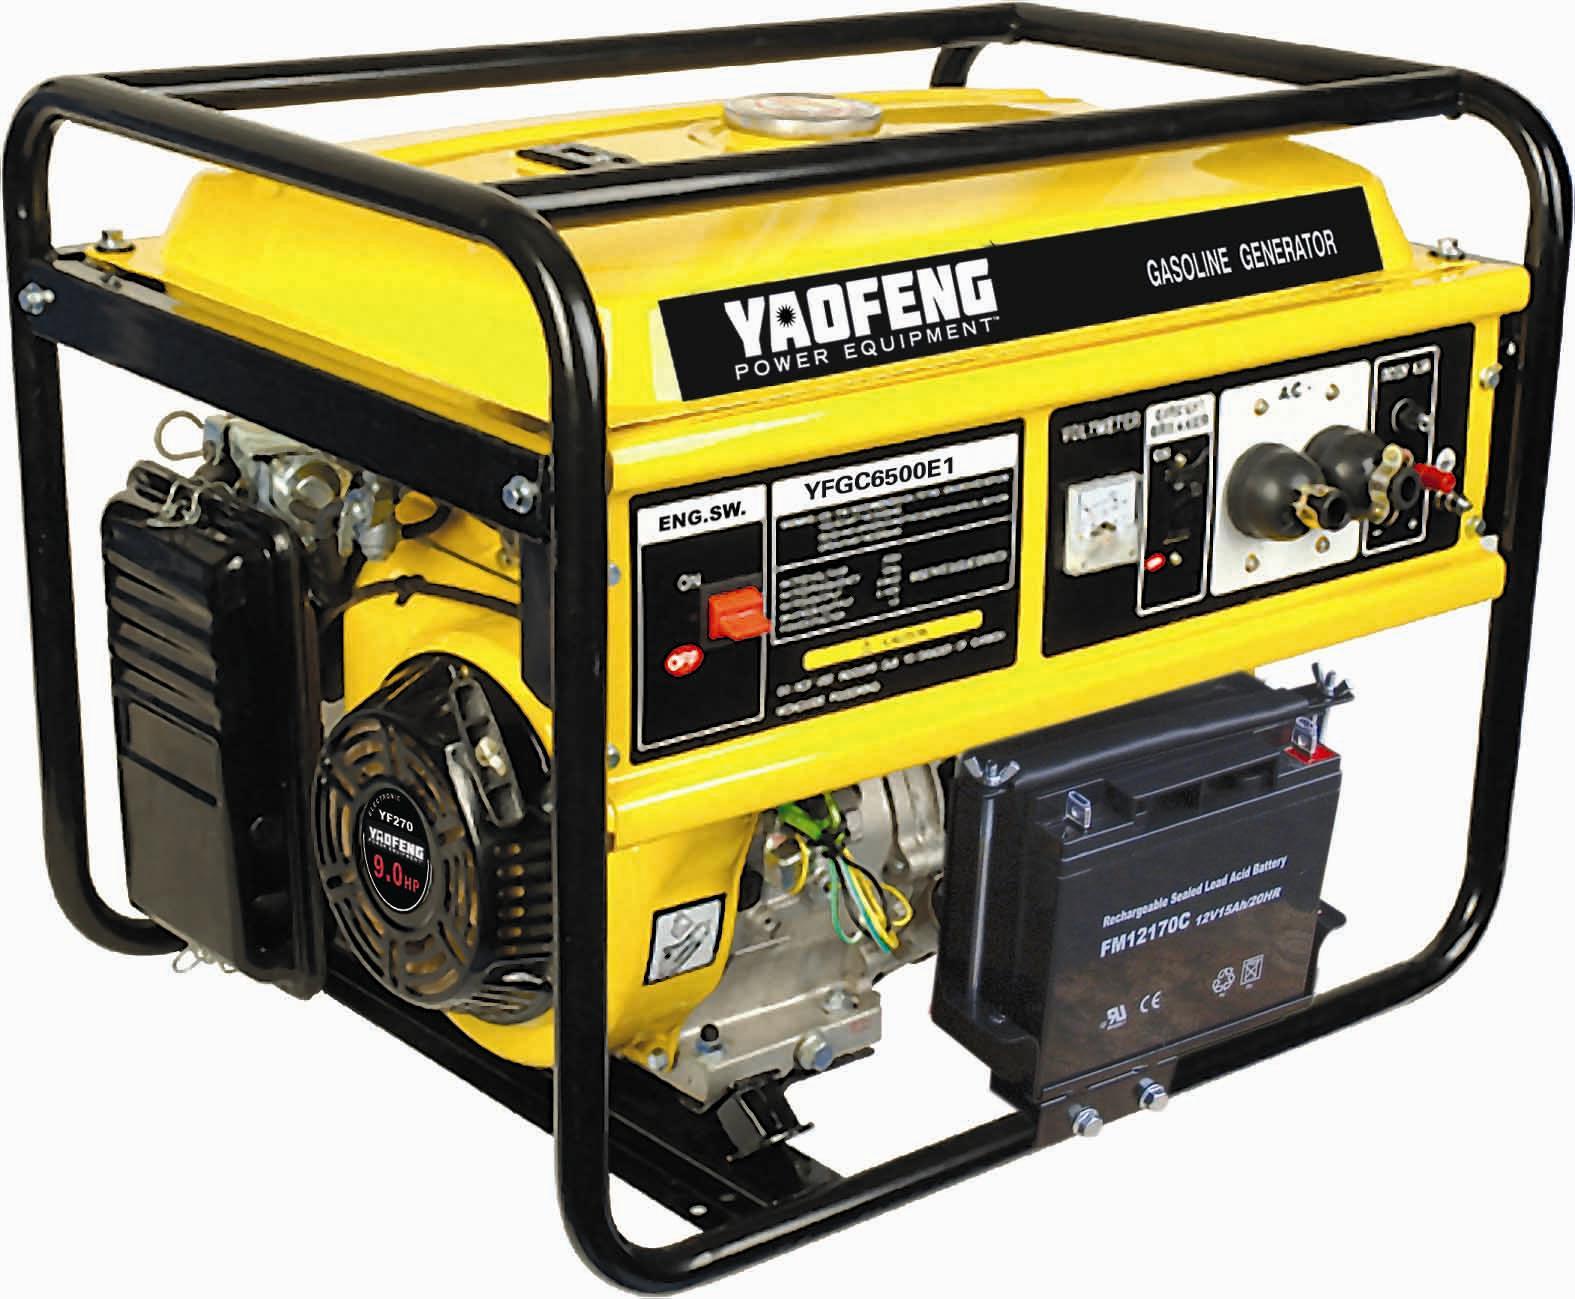 5000 Watts Portable Power Gasoline Generator with EPA, Carb, CE, Soncap Certificate (YFGC6500E1)